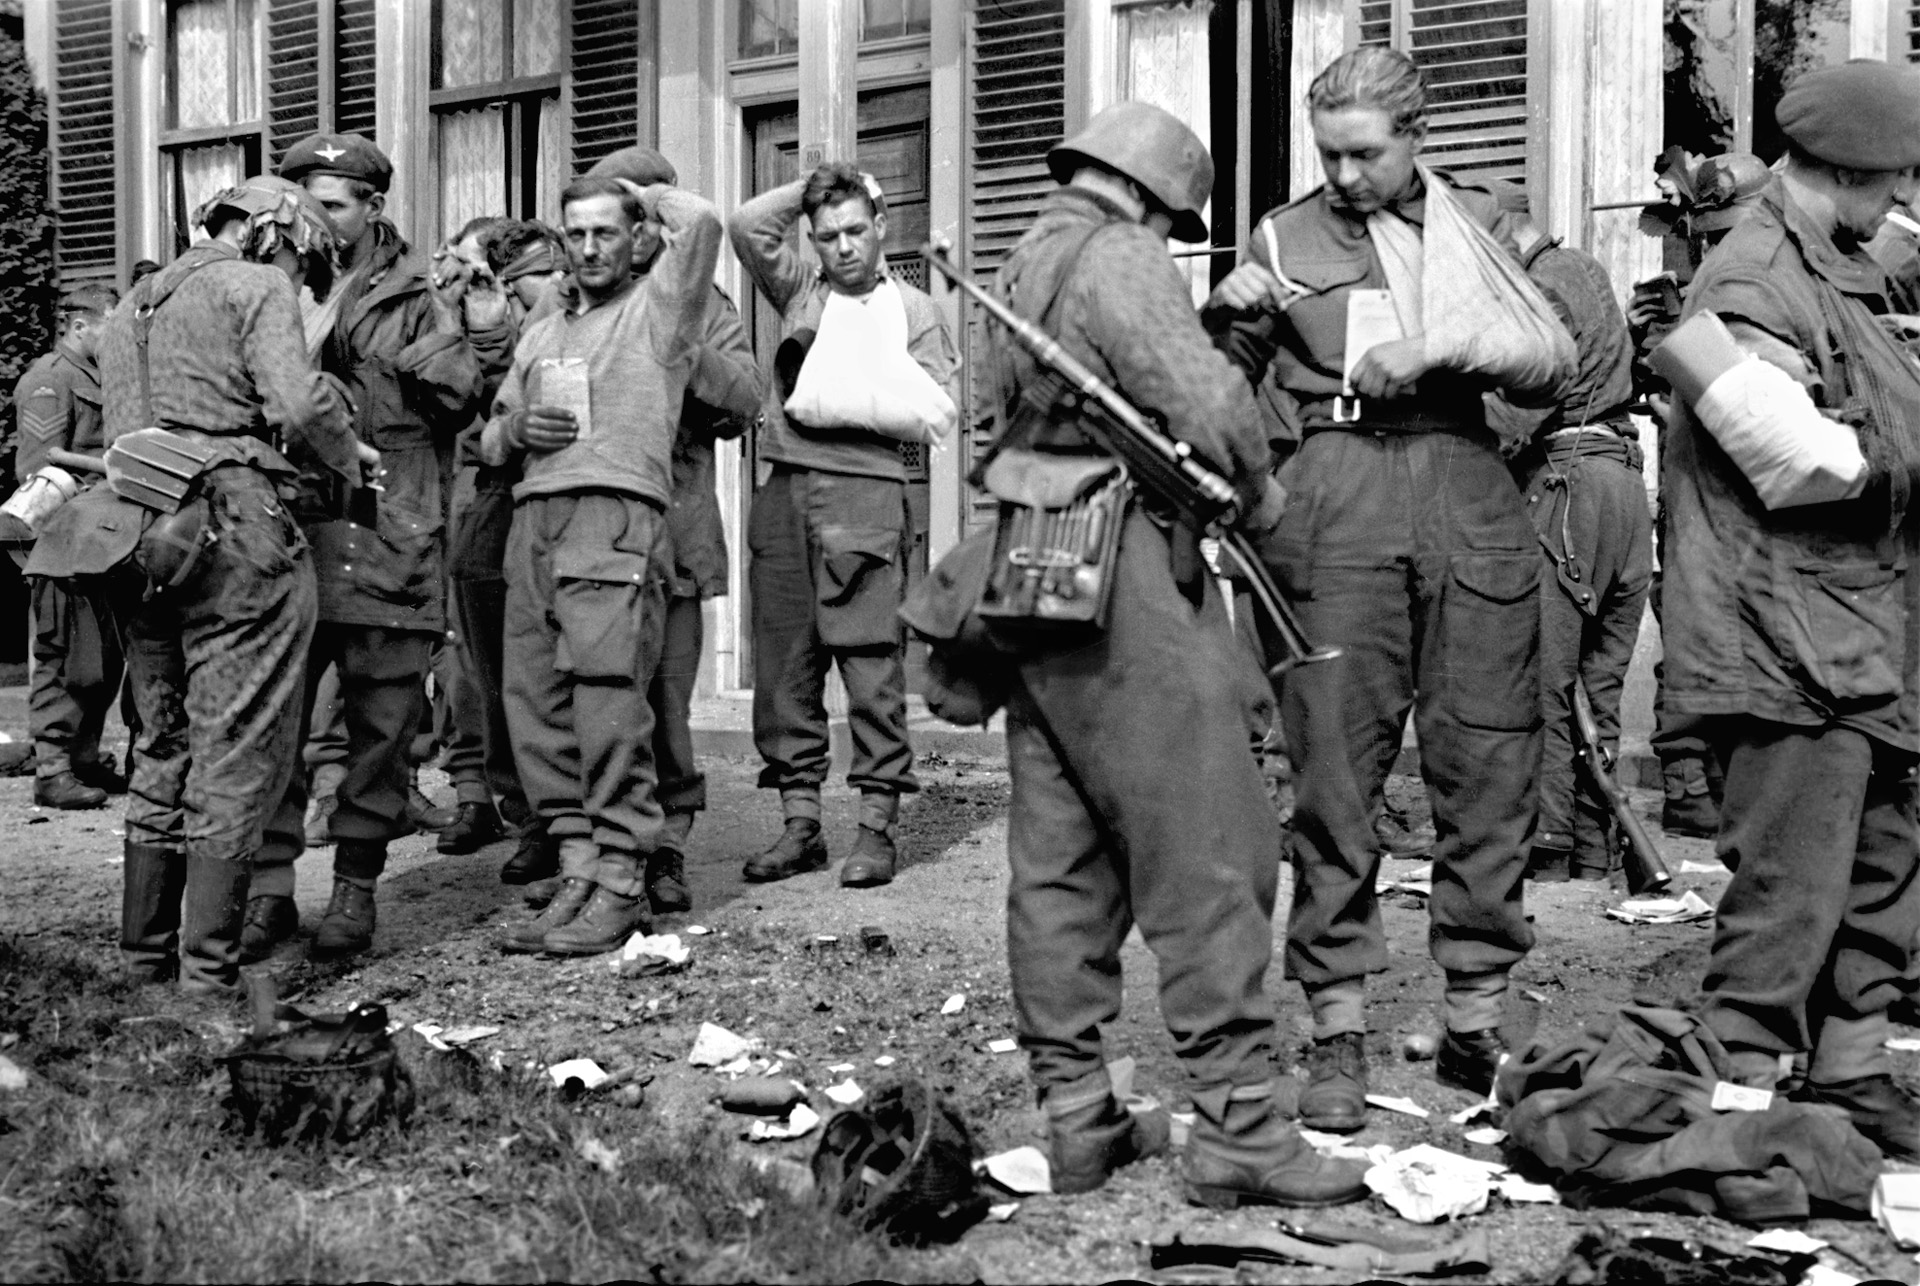 German soldiers administer first aid to some of the 400 wounded British airborne troops left behind in Arnhem.